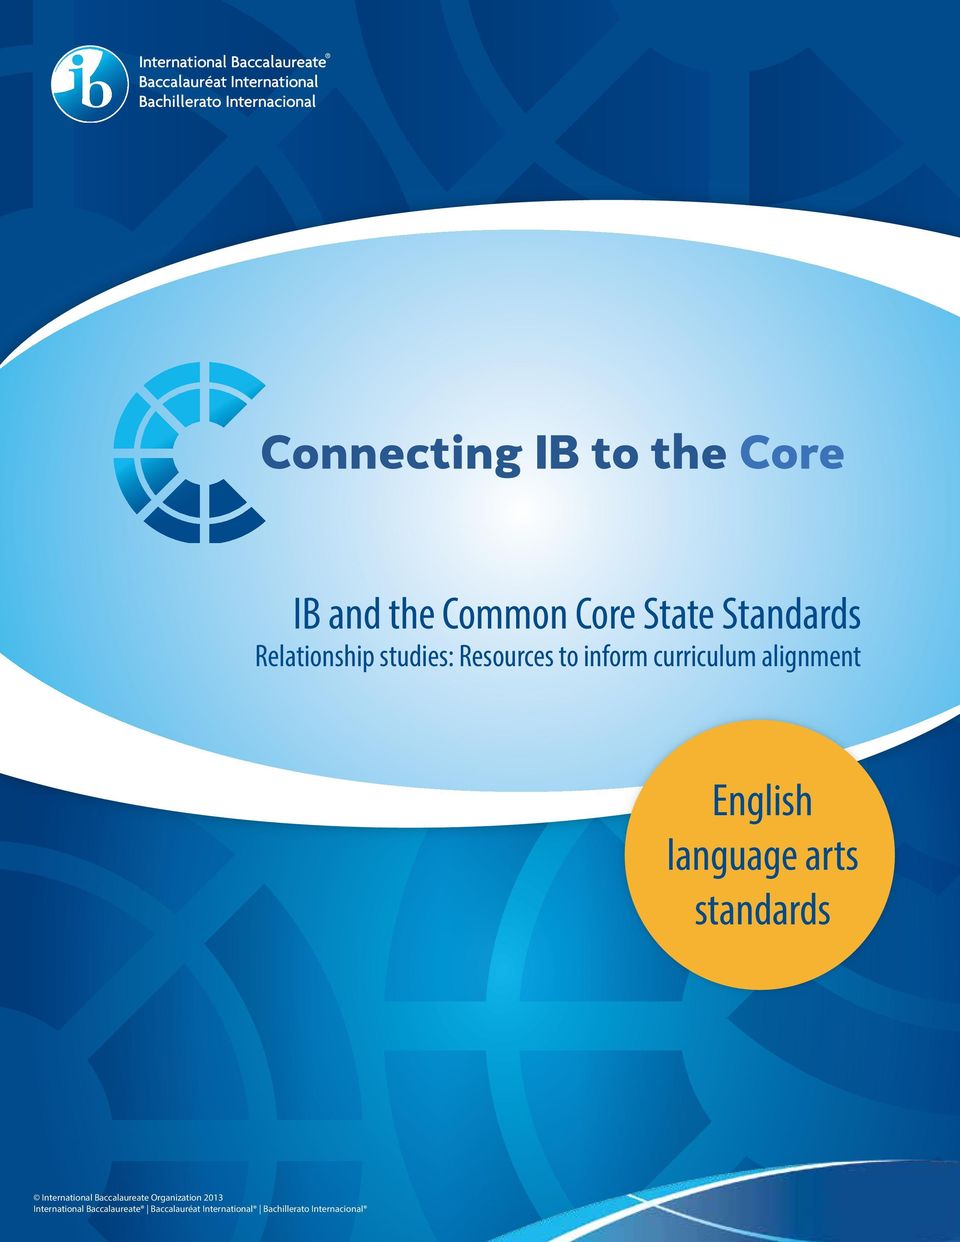 ib and the common core state standards relationship studies  resources to inform curriculum